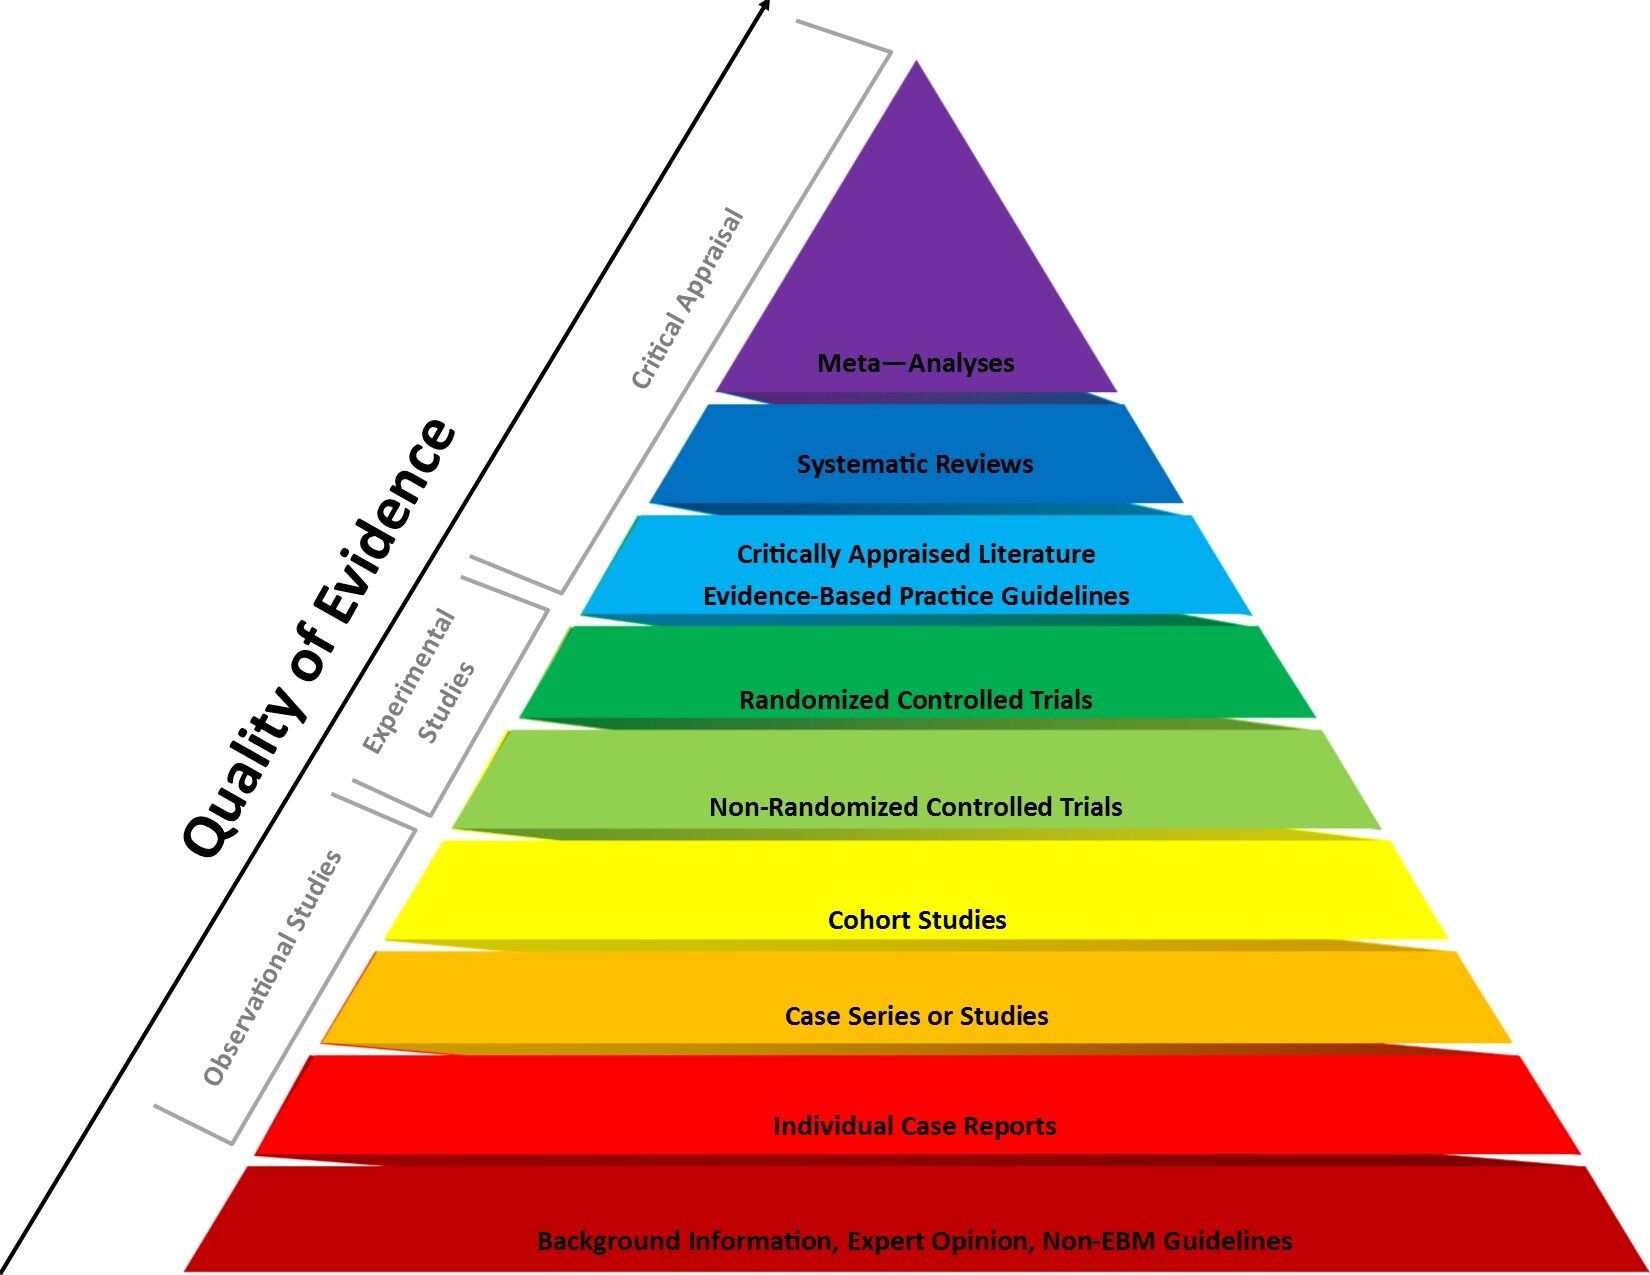 traditional research literature hierarchy